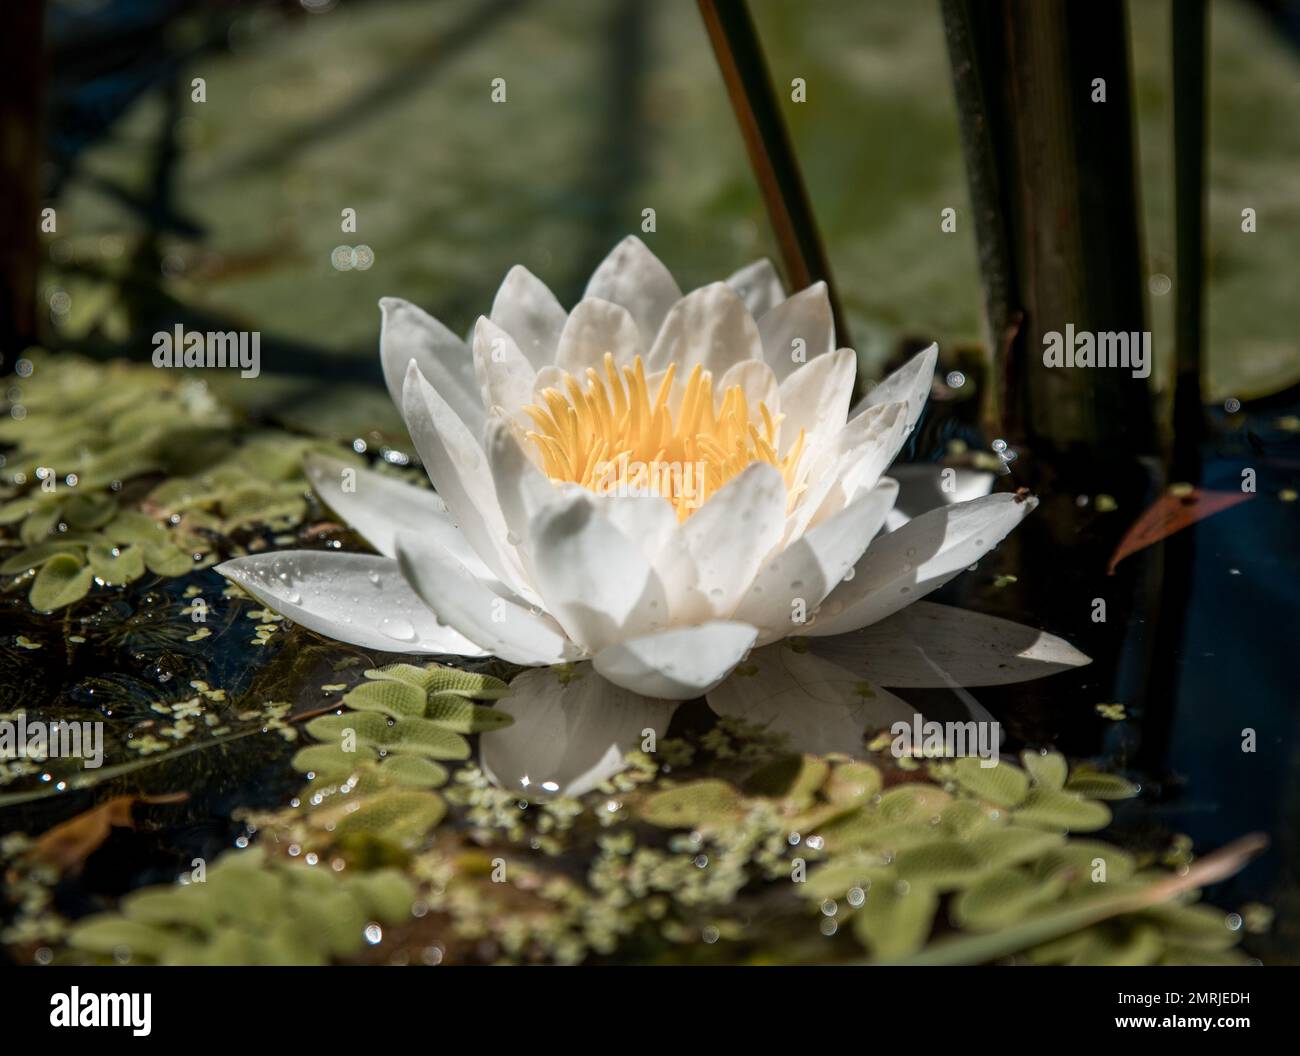 A closeup f a blossom Nymphaea candida flower with leaves on lake surface Stock Photo